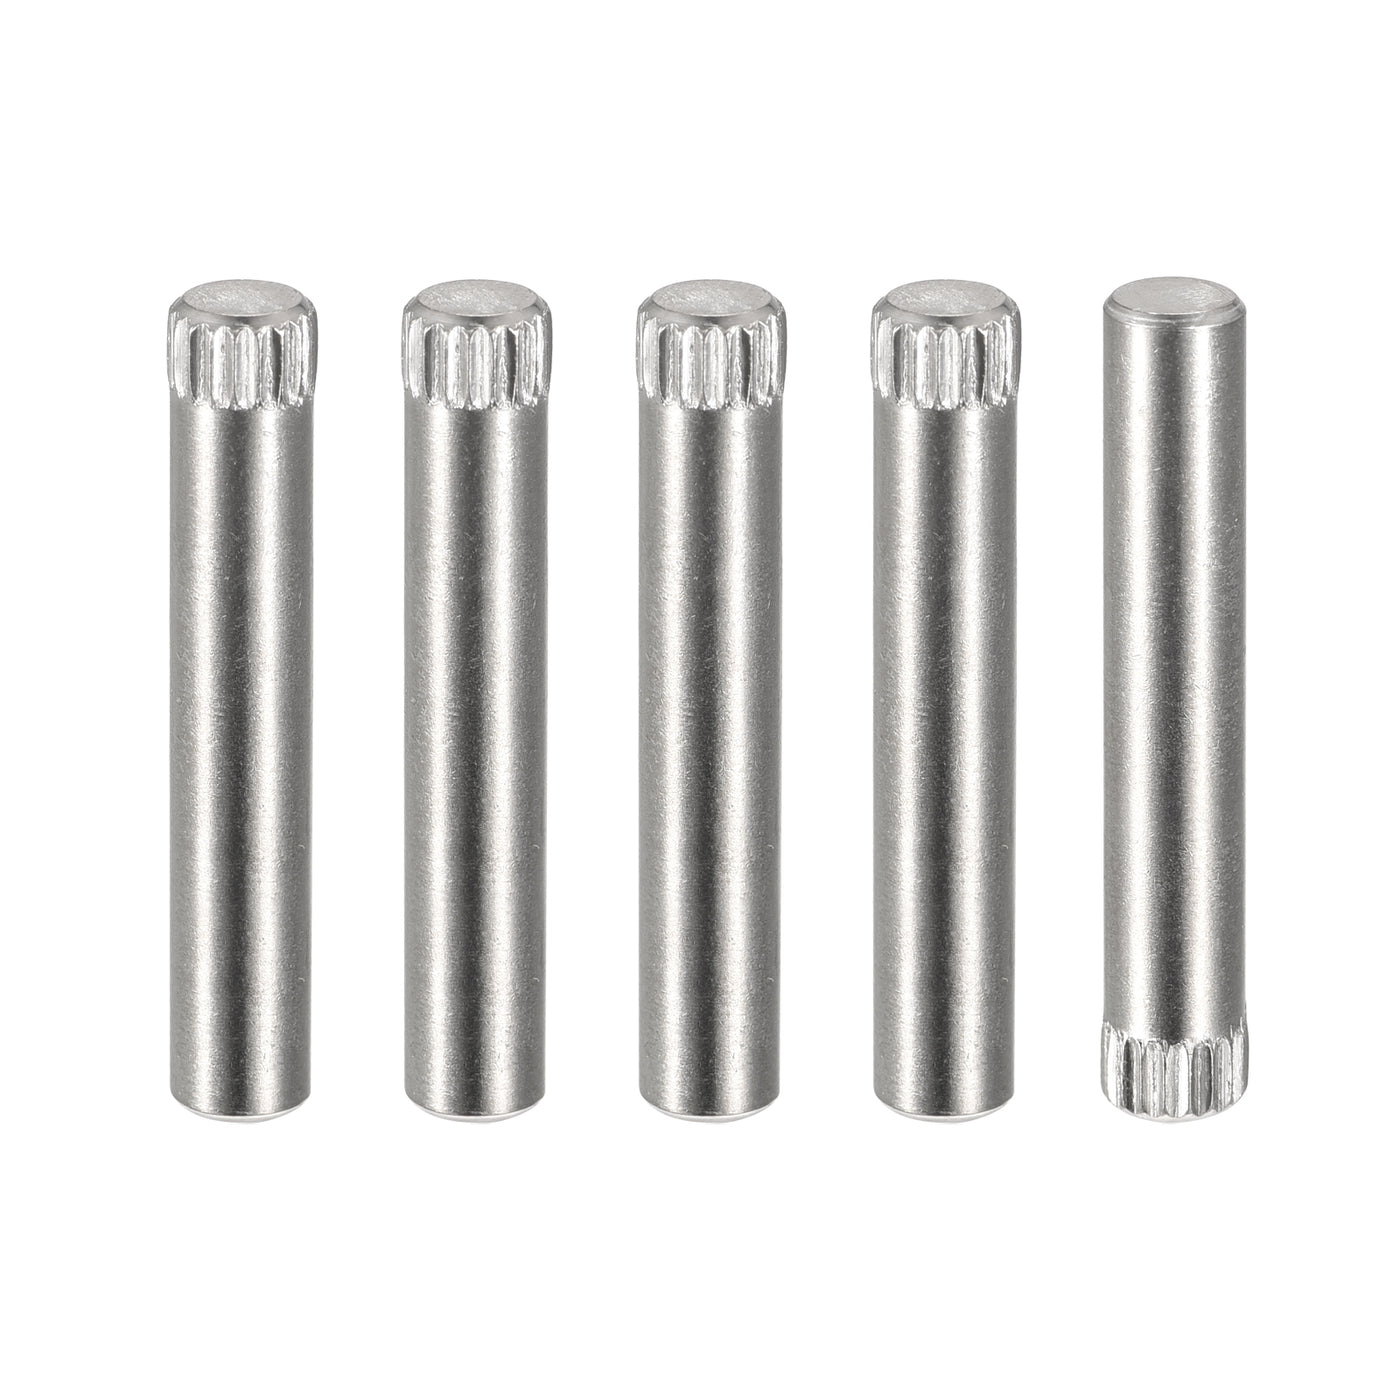 uxcell Uxcell 5x30mm 304 Stainless Steel Dowel Pins, 5Pcs Knurled Head Flat End Dowel Pin